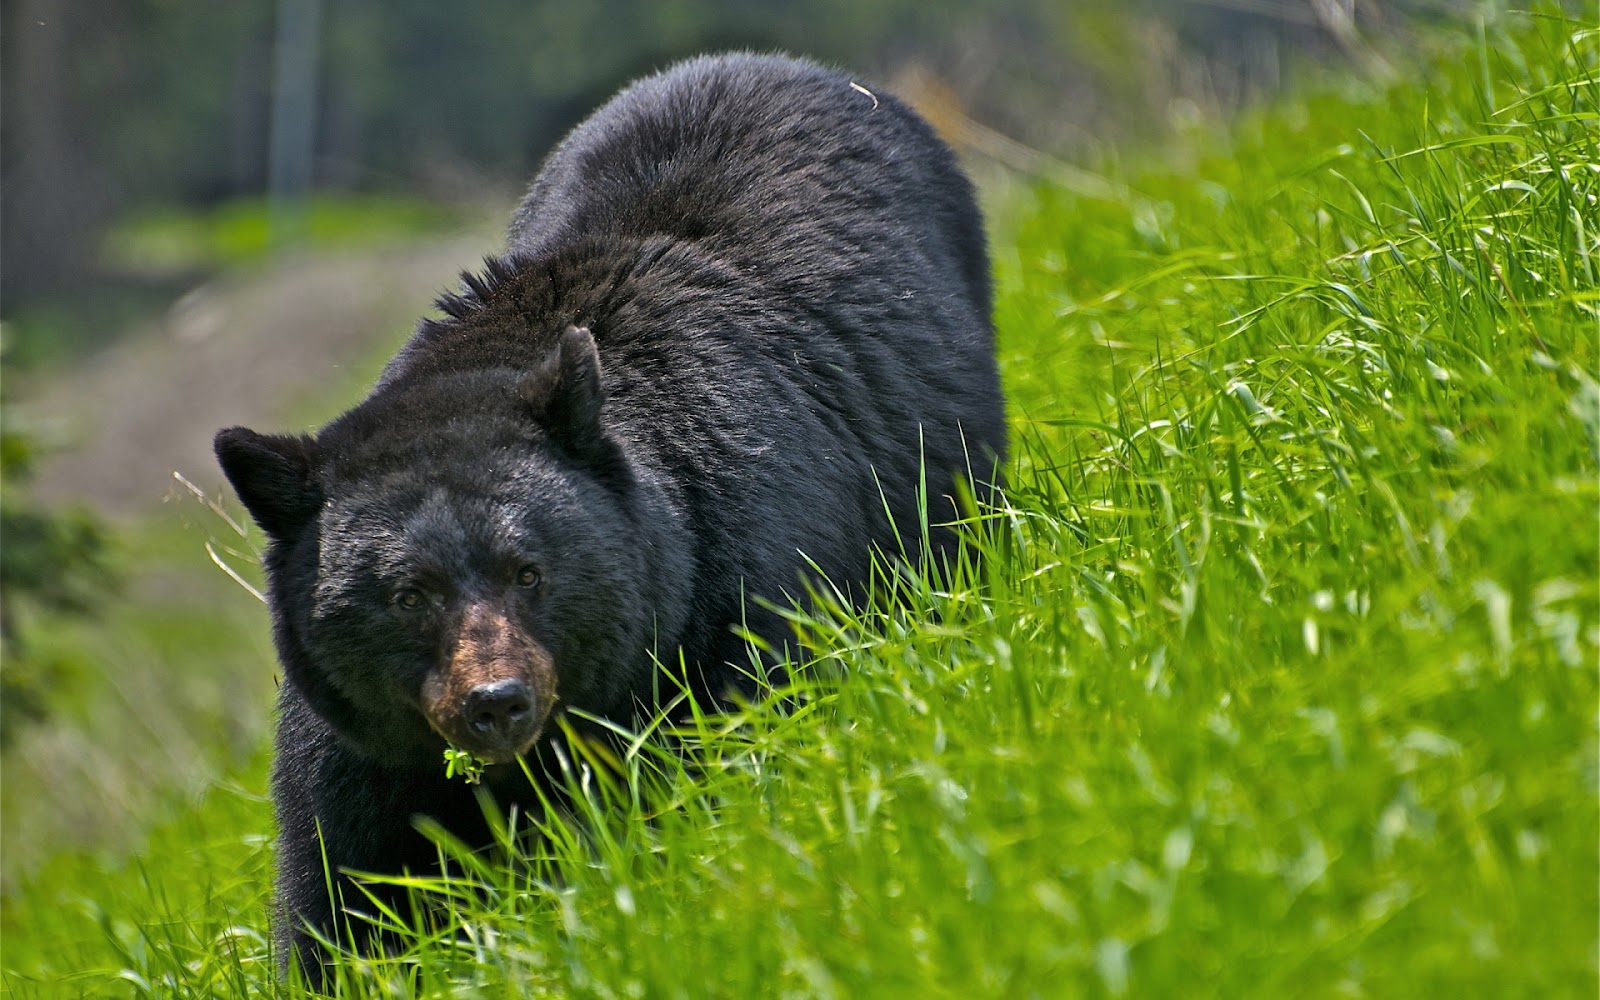 HD Bear Wallpaper With A Black In The High Grass